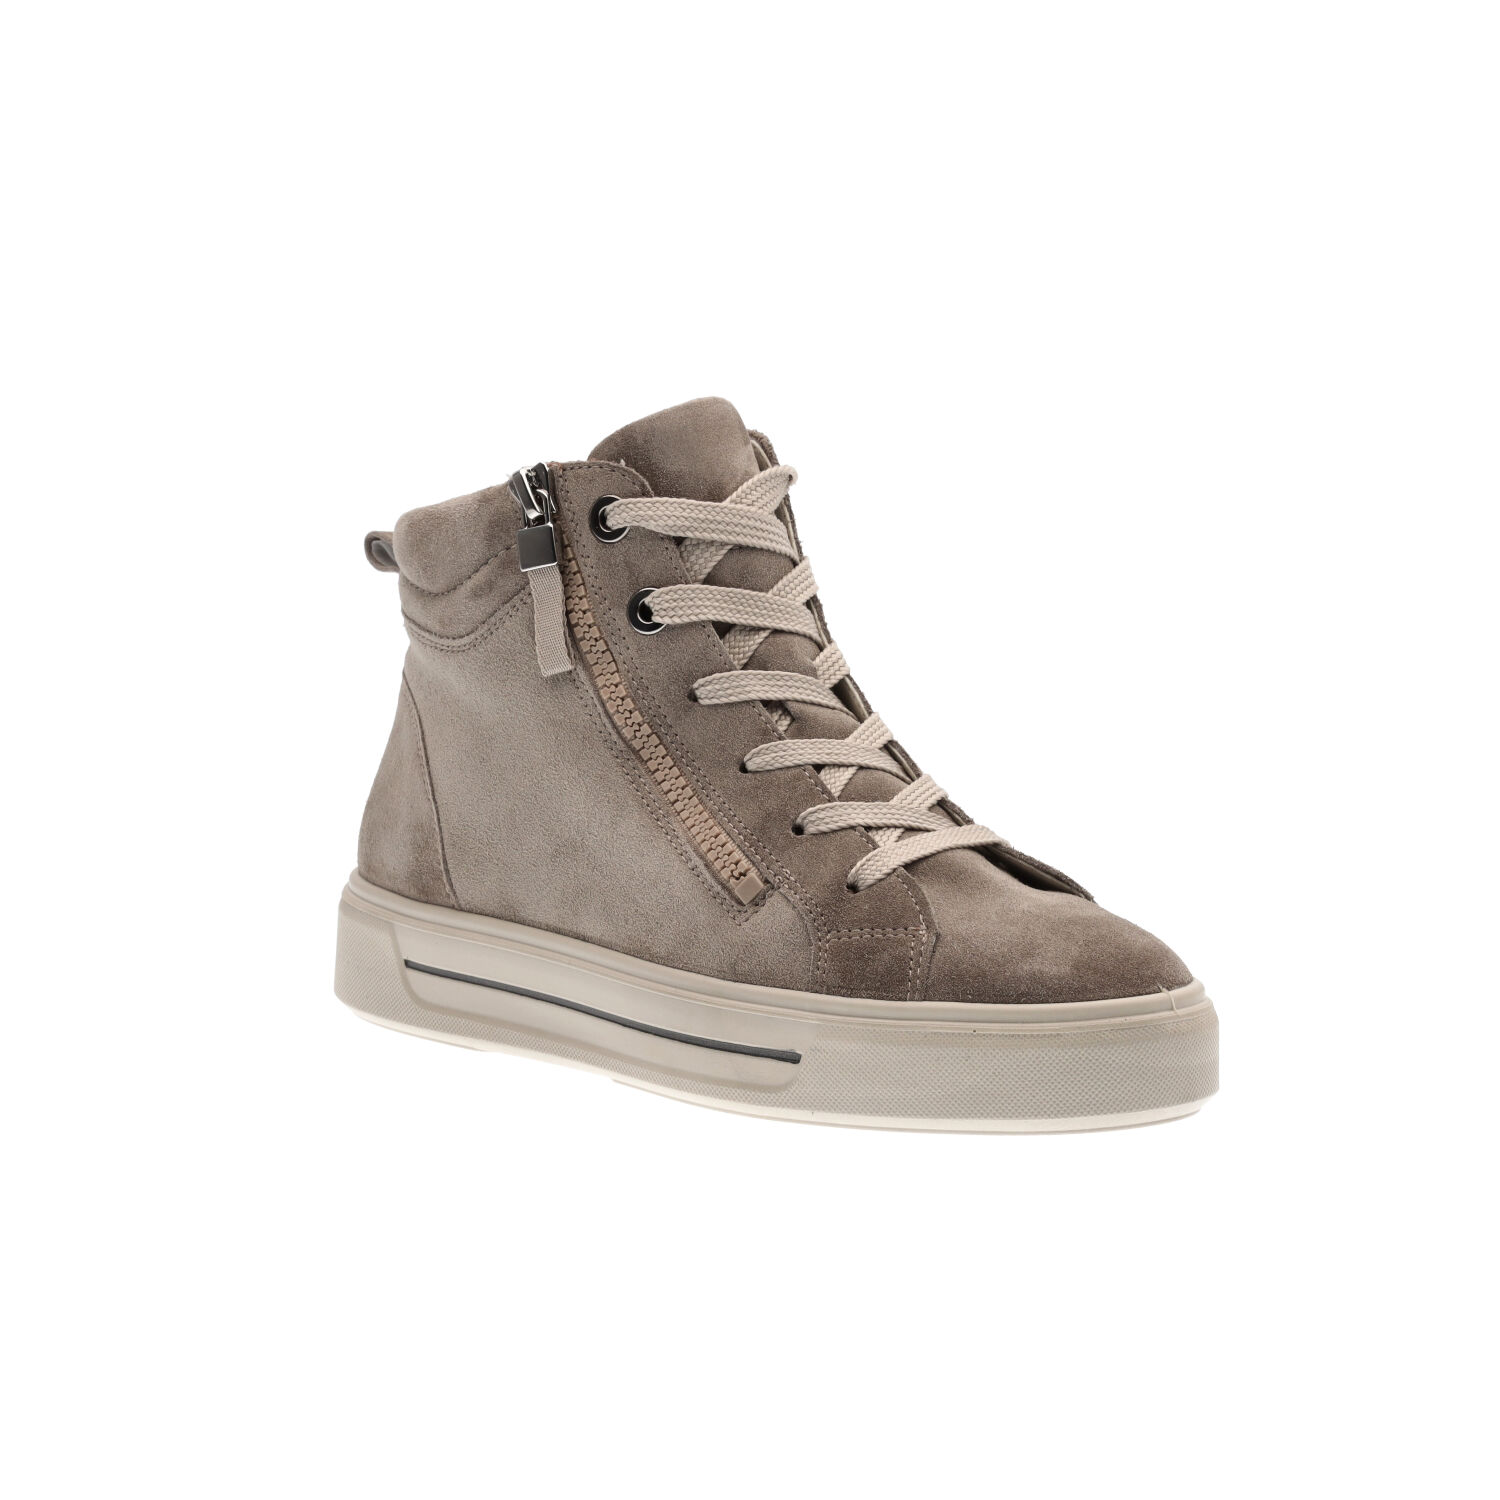 Courtyard - Grey suede leather